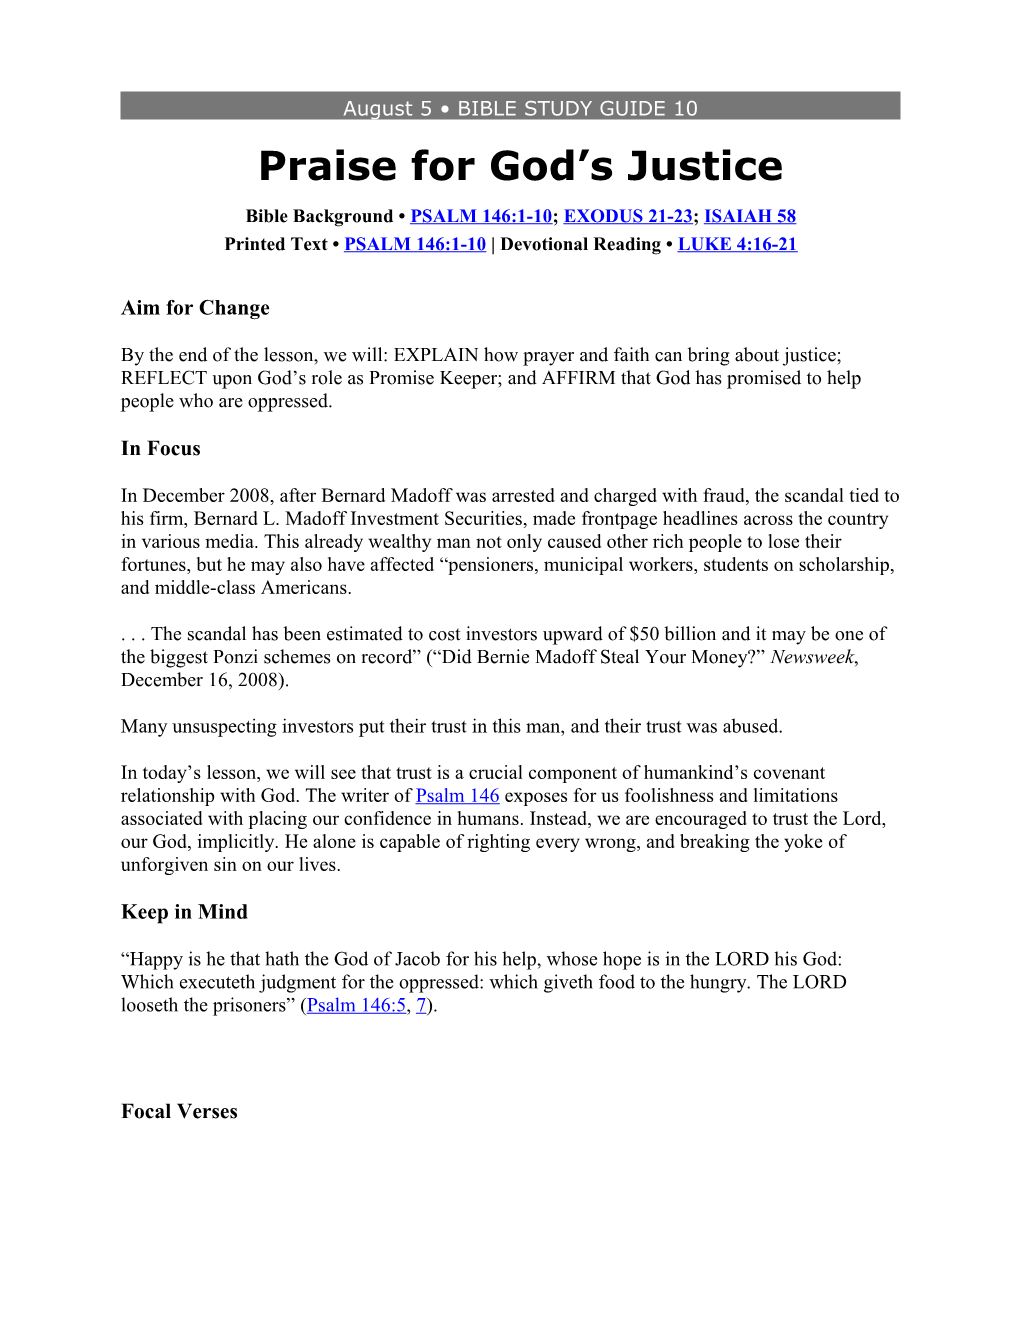 Praise for God S Justice